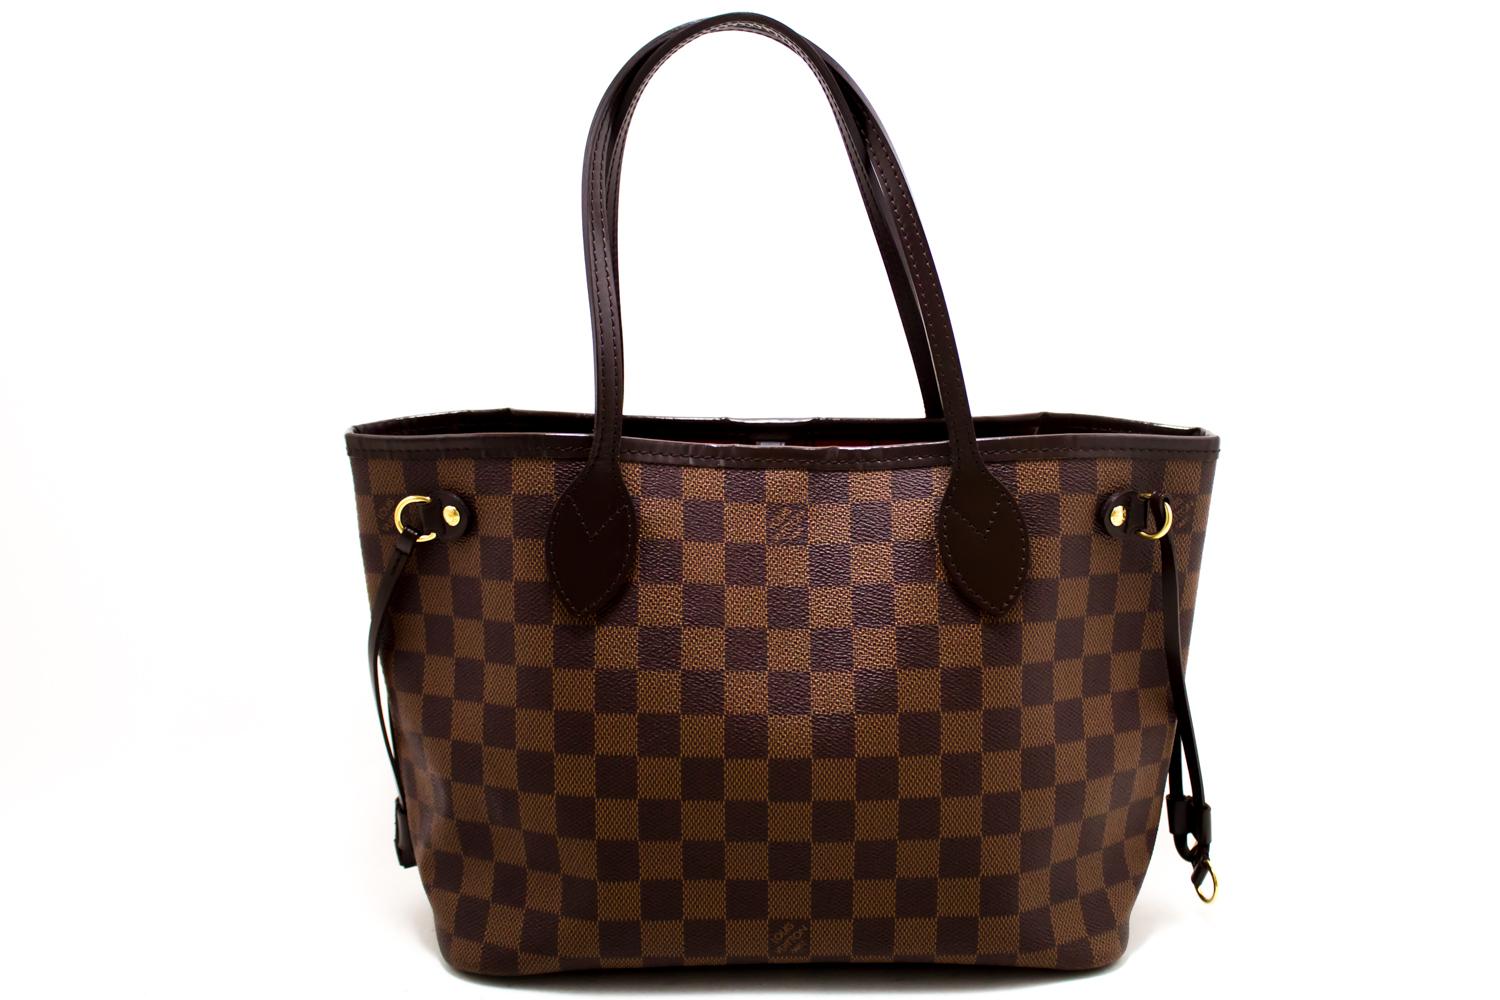 An authentic Louis Vuitton Damier Ebene Neverfull PM Shoulder Bag Canvas Tote. The color is Brown. The outside material is Canvas. The pattern is Damier.
Conditions & Ratings
Outside material: Canvas / Leather
Main color: Brown
Closure: